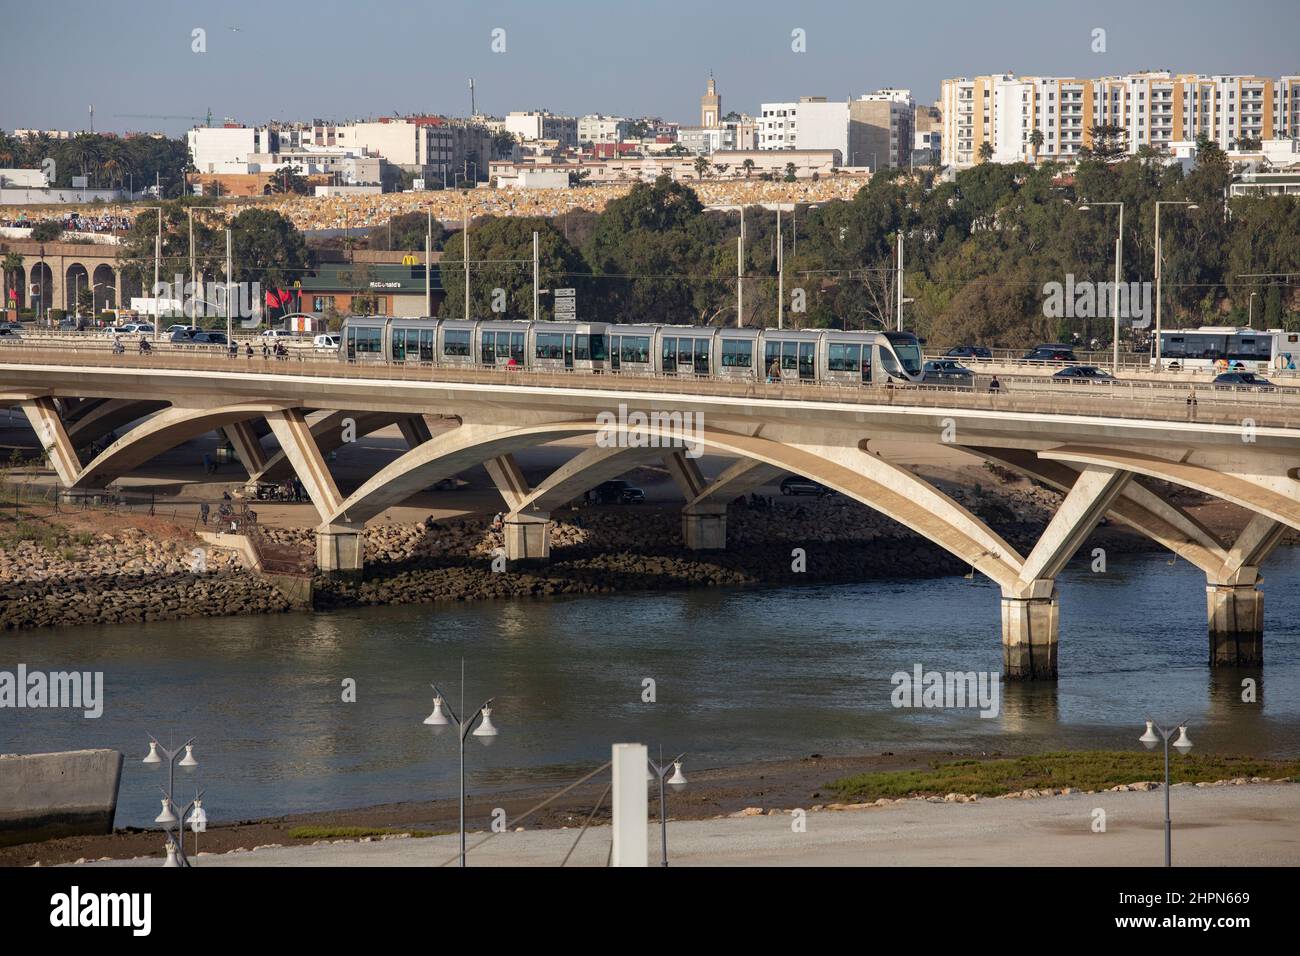 Busy vehicle traffic and passenger train moves across the Hassan II bridge connecting Salé and Rabat in Morocco, North Africa. Stock Photo